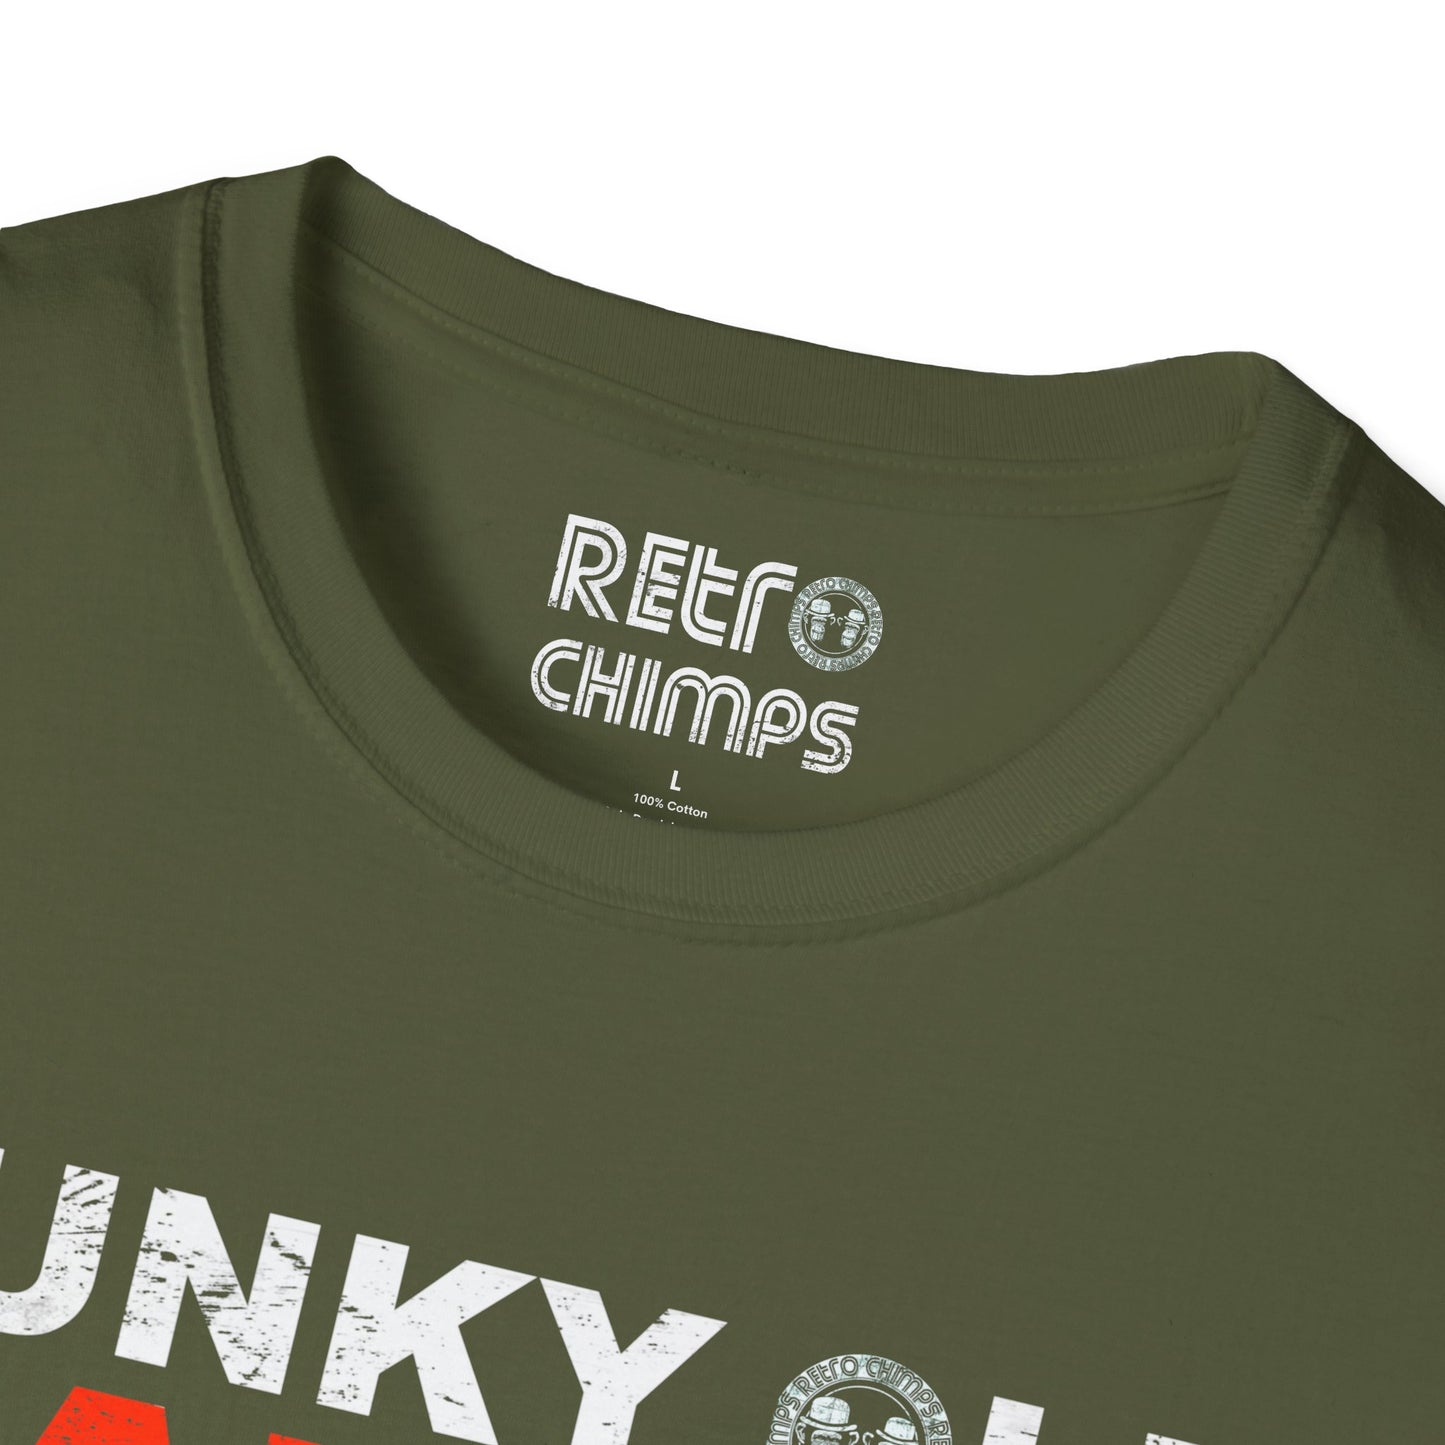 Retro Chimps Funky Old Patina Red & White Logo T-Shirt